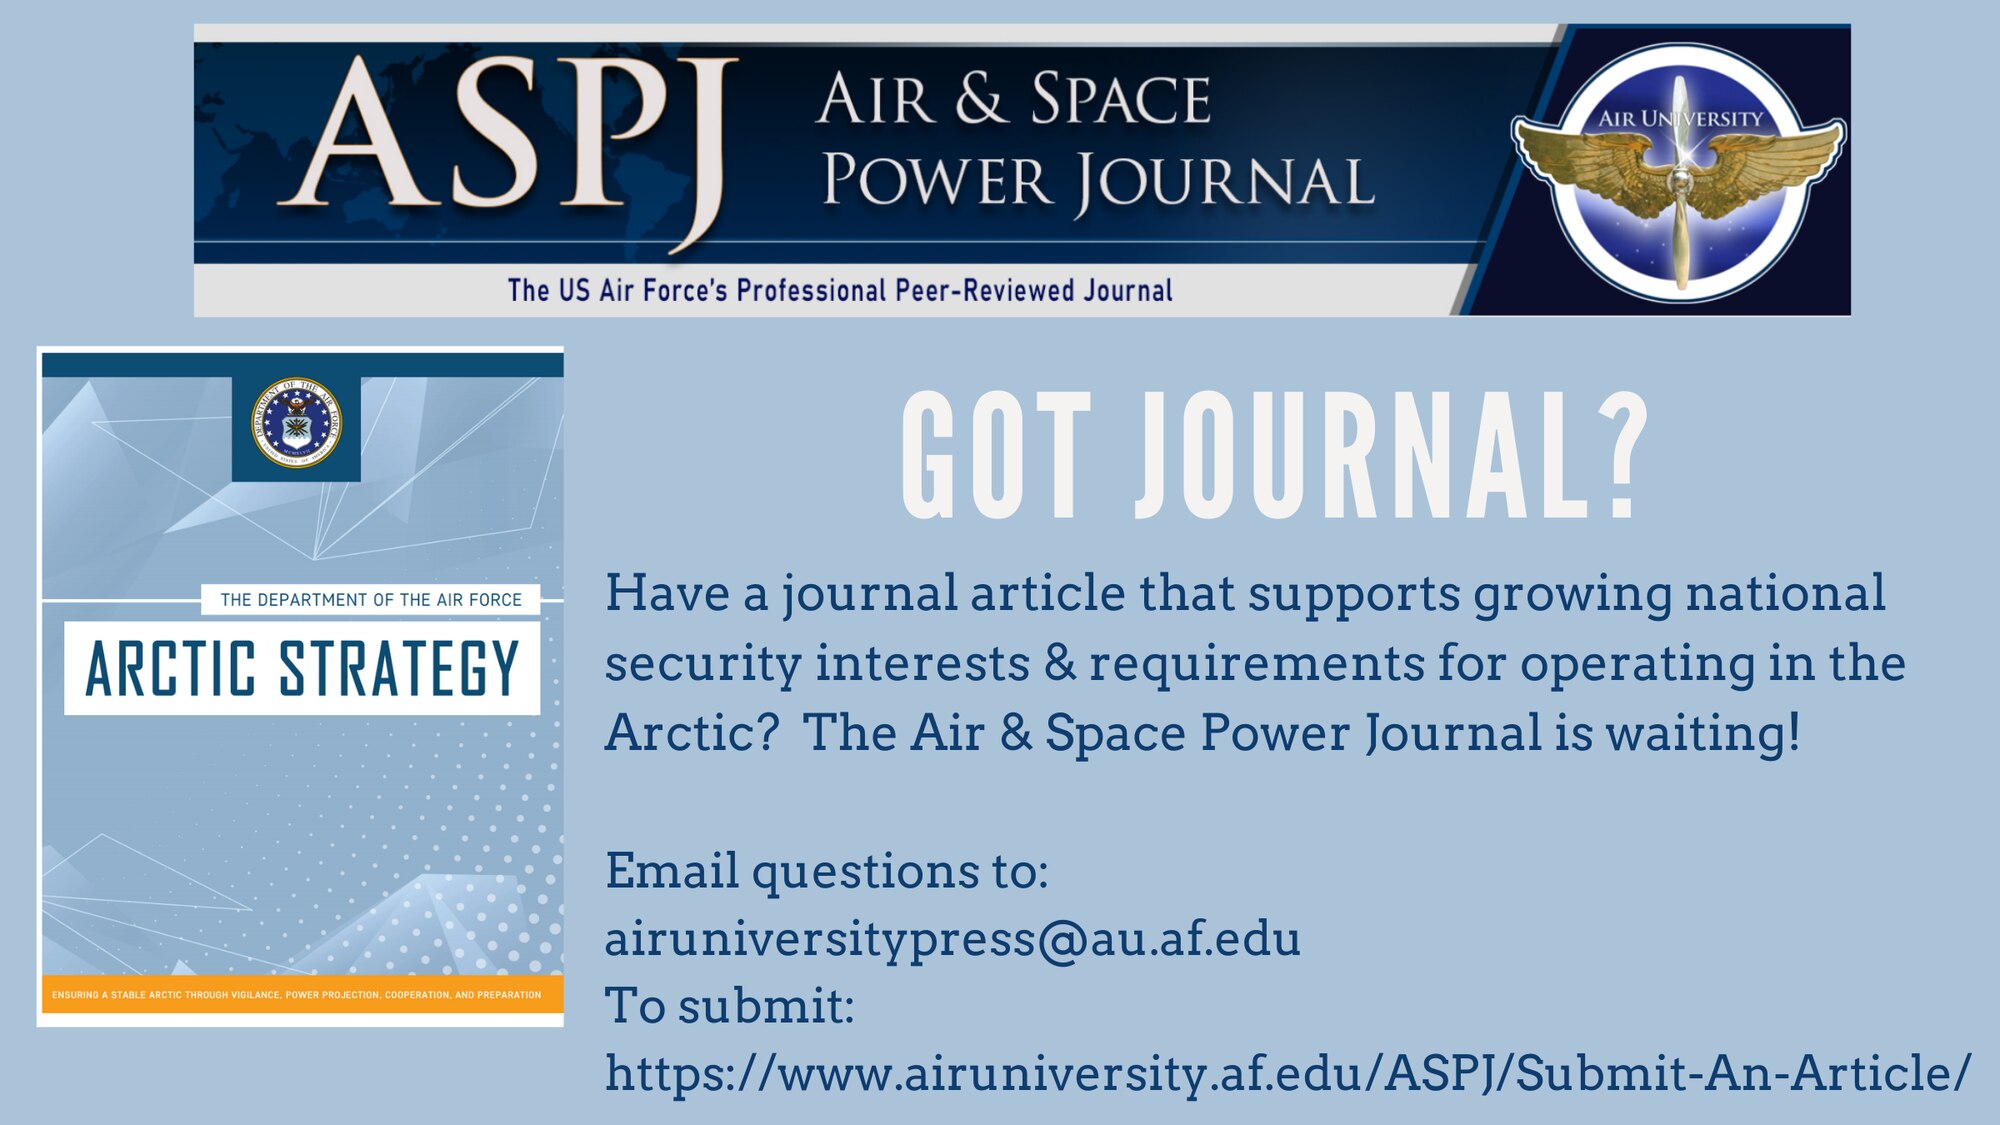 In support of the Department of Defense and Department of the Air Force’s Arctic Strategy, Air University Press is soliciting journal articles to support the growing national security interests and requirements for operating in the Arctic region. Products could be historical cases with applied lessons for the future, lessons-learned from ongoing initiatives, or suggestions for future constructs.